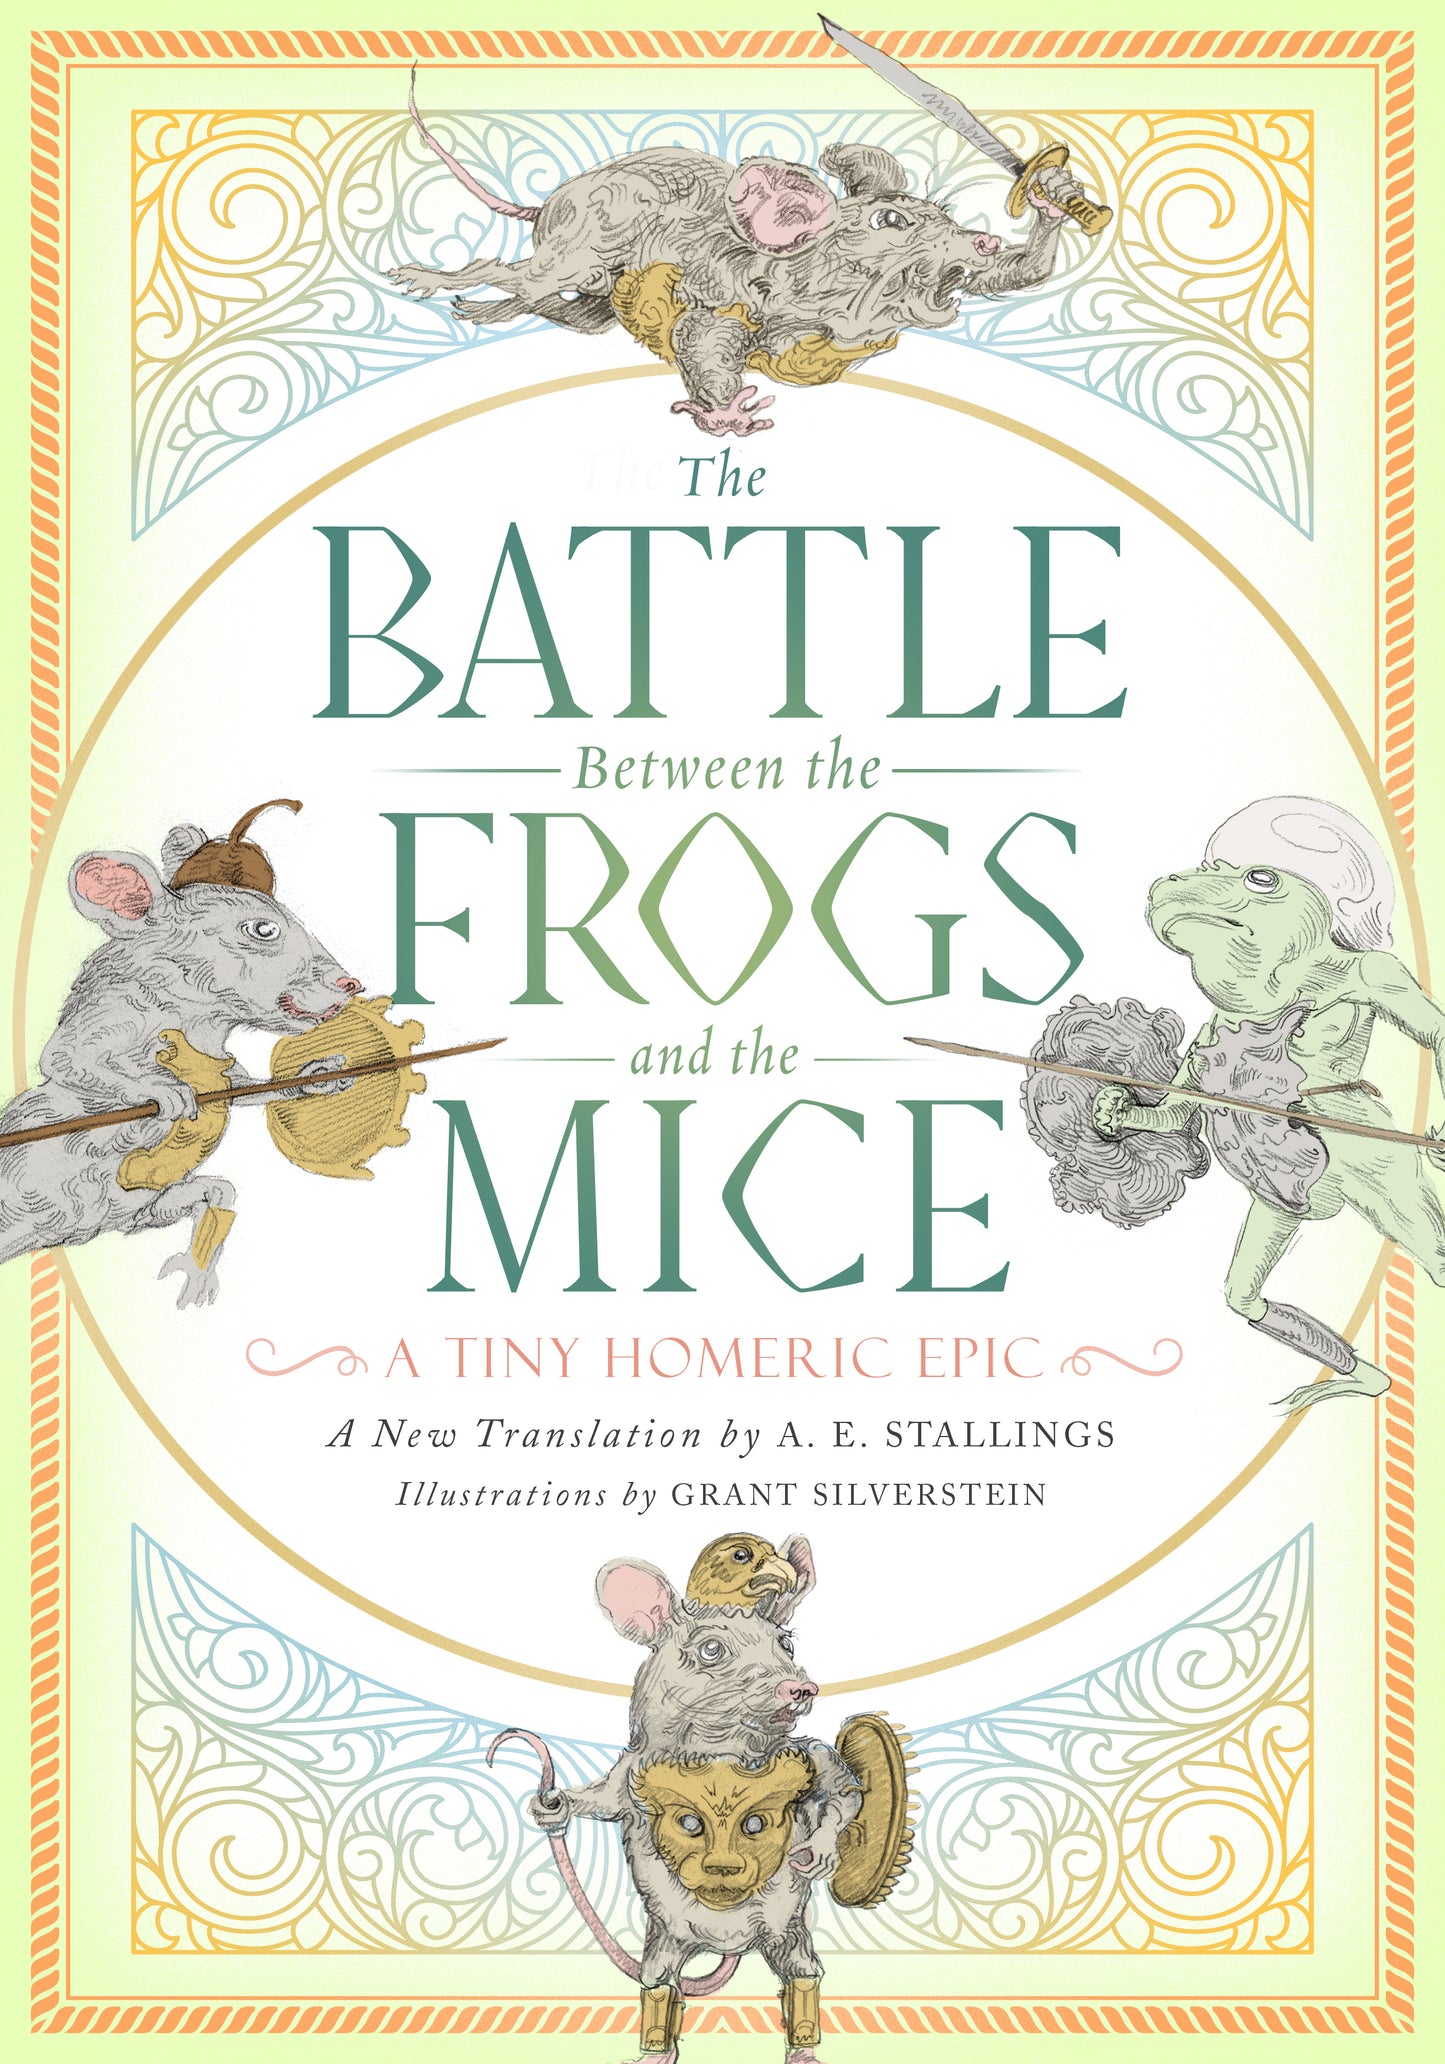 The Battle Between the Frogs and the Mice